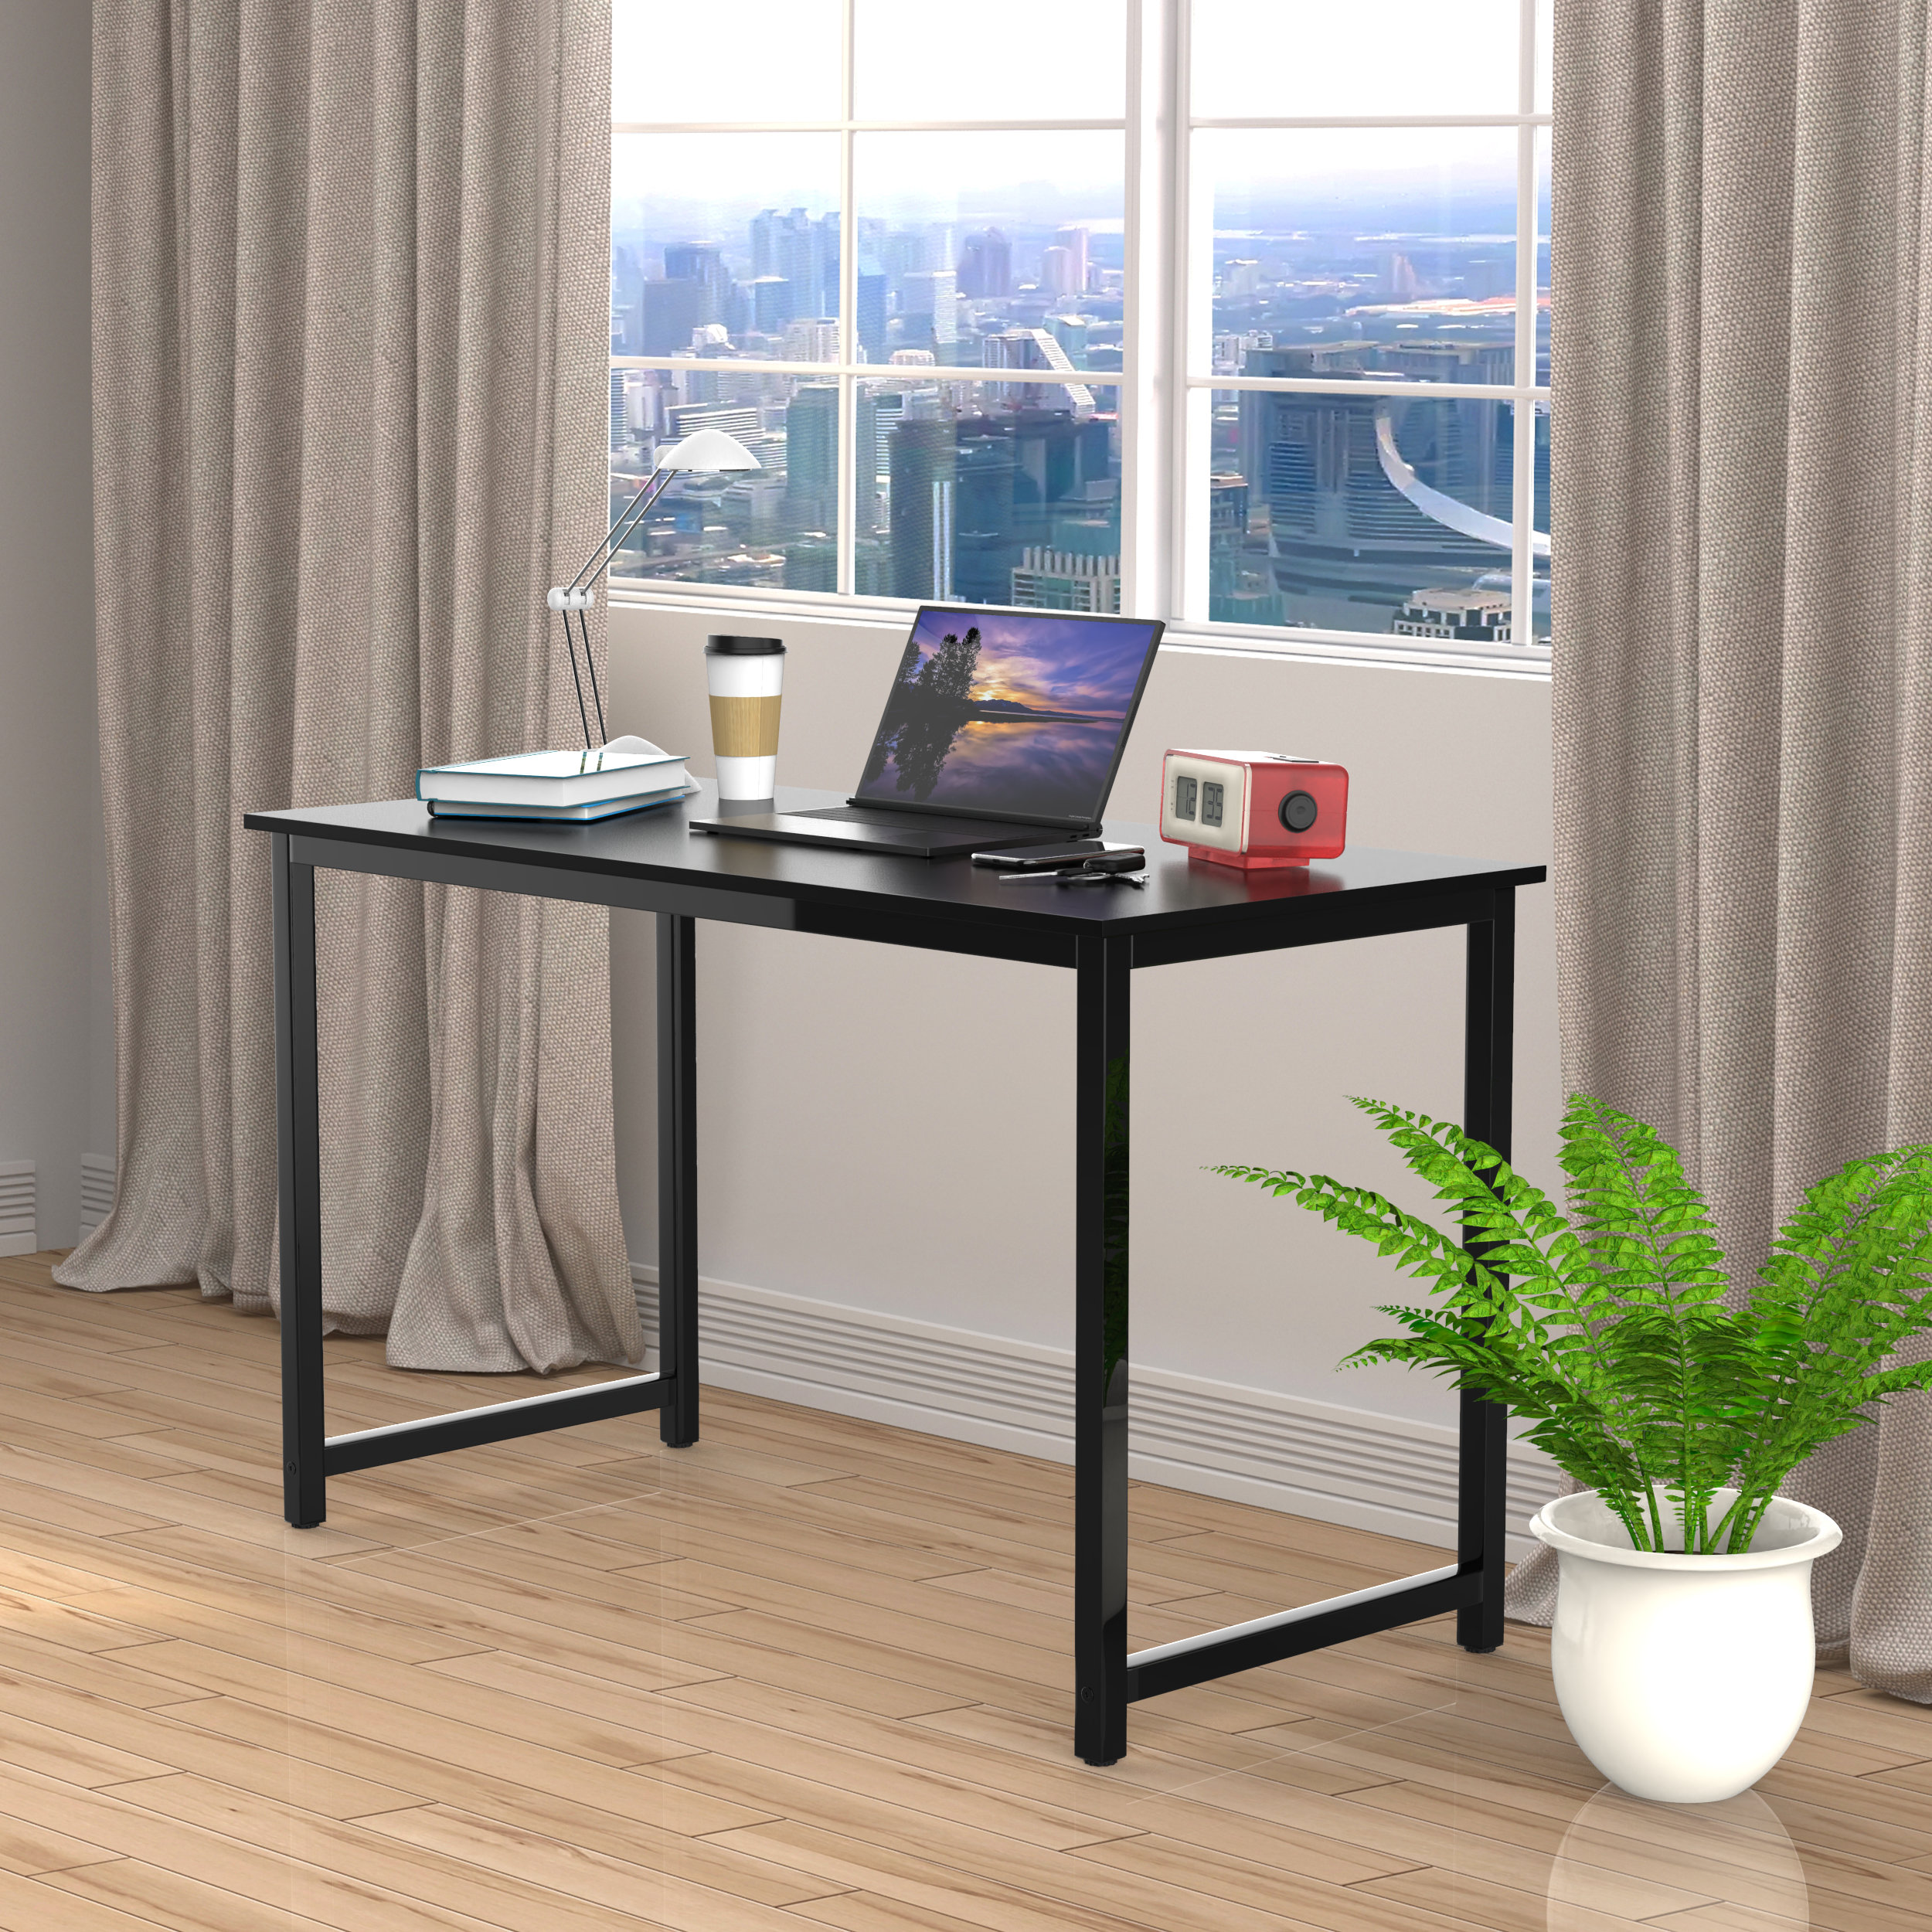 Laptop Desk Study Table Standing Office Desk Gaming Student Bedroom  Computer Desk Accessories simple Home Office